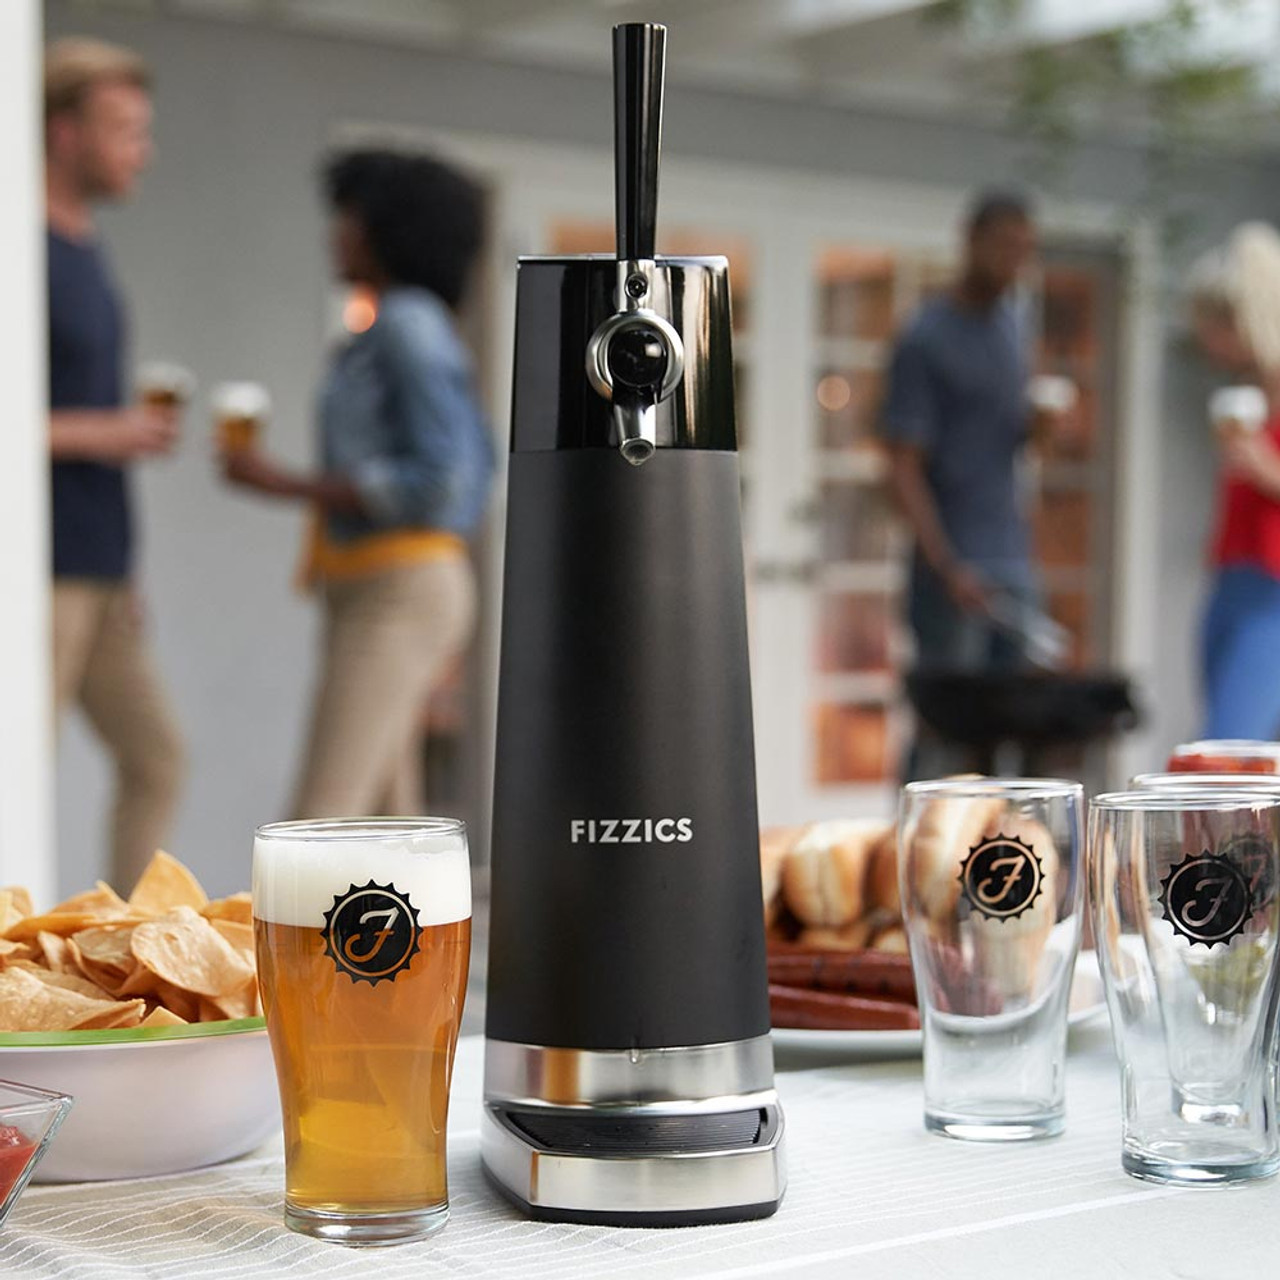 Fizzics Draftpour Beer Tap turns regular beer into a nitro-style keg